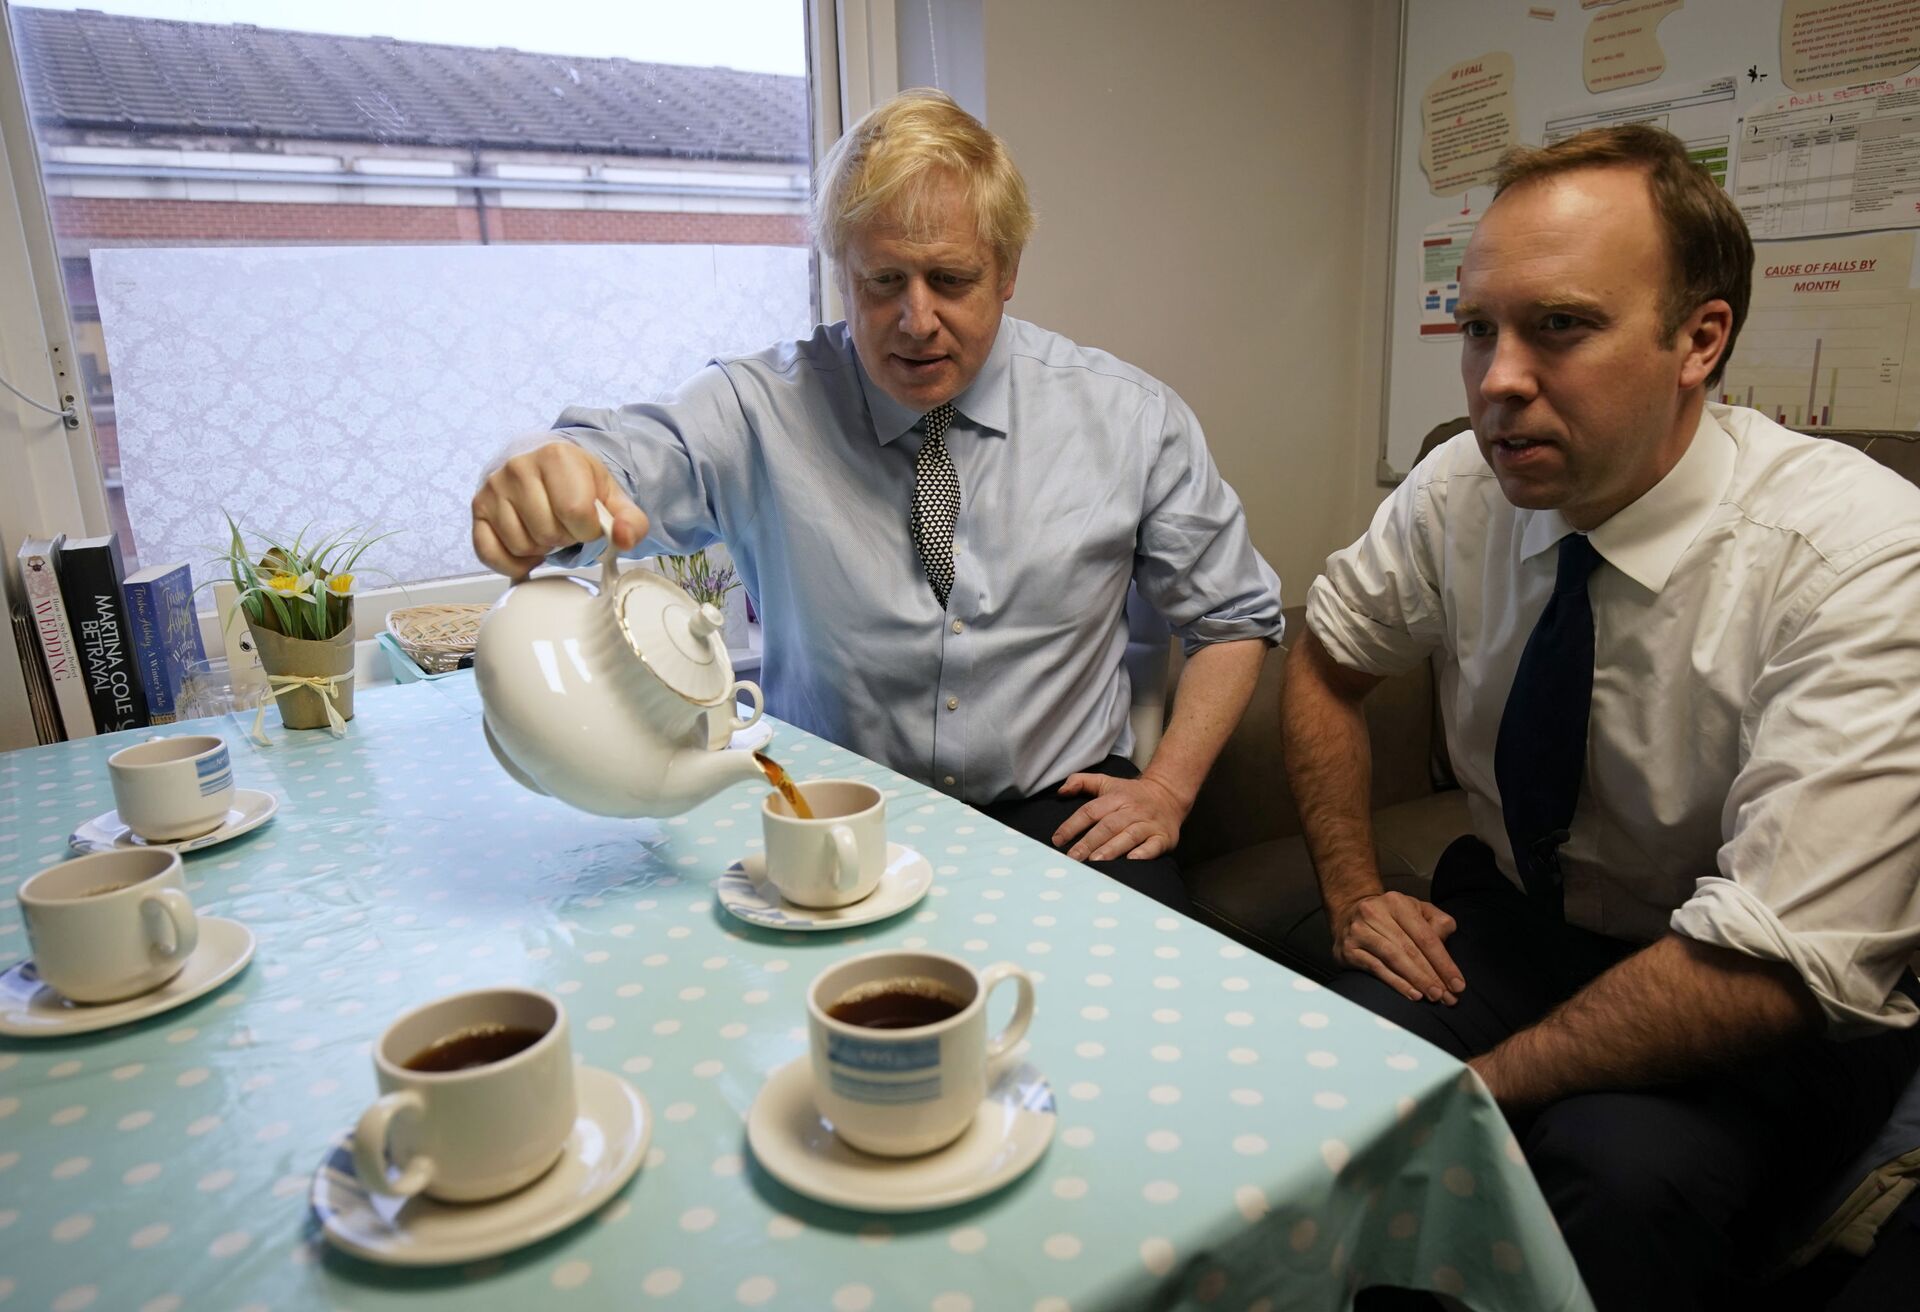 Secretary of State for Health and Social Care Matt Hancock, right, and Prime Minister Boris Johnson have tea with members of staff as they visit Bassetlaw District General Hospital, during their General Election campaign in Worksop, England, Friday, Nov. 22, 2019.  - Sputnik International, 1920, 07.09.2021